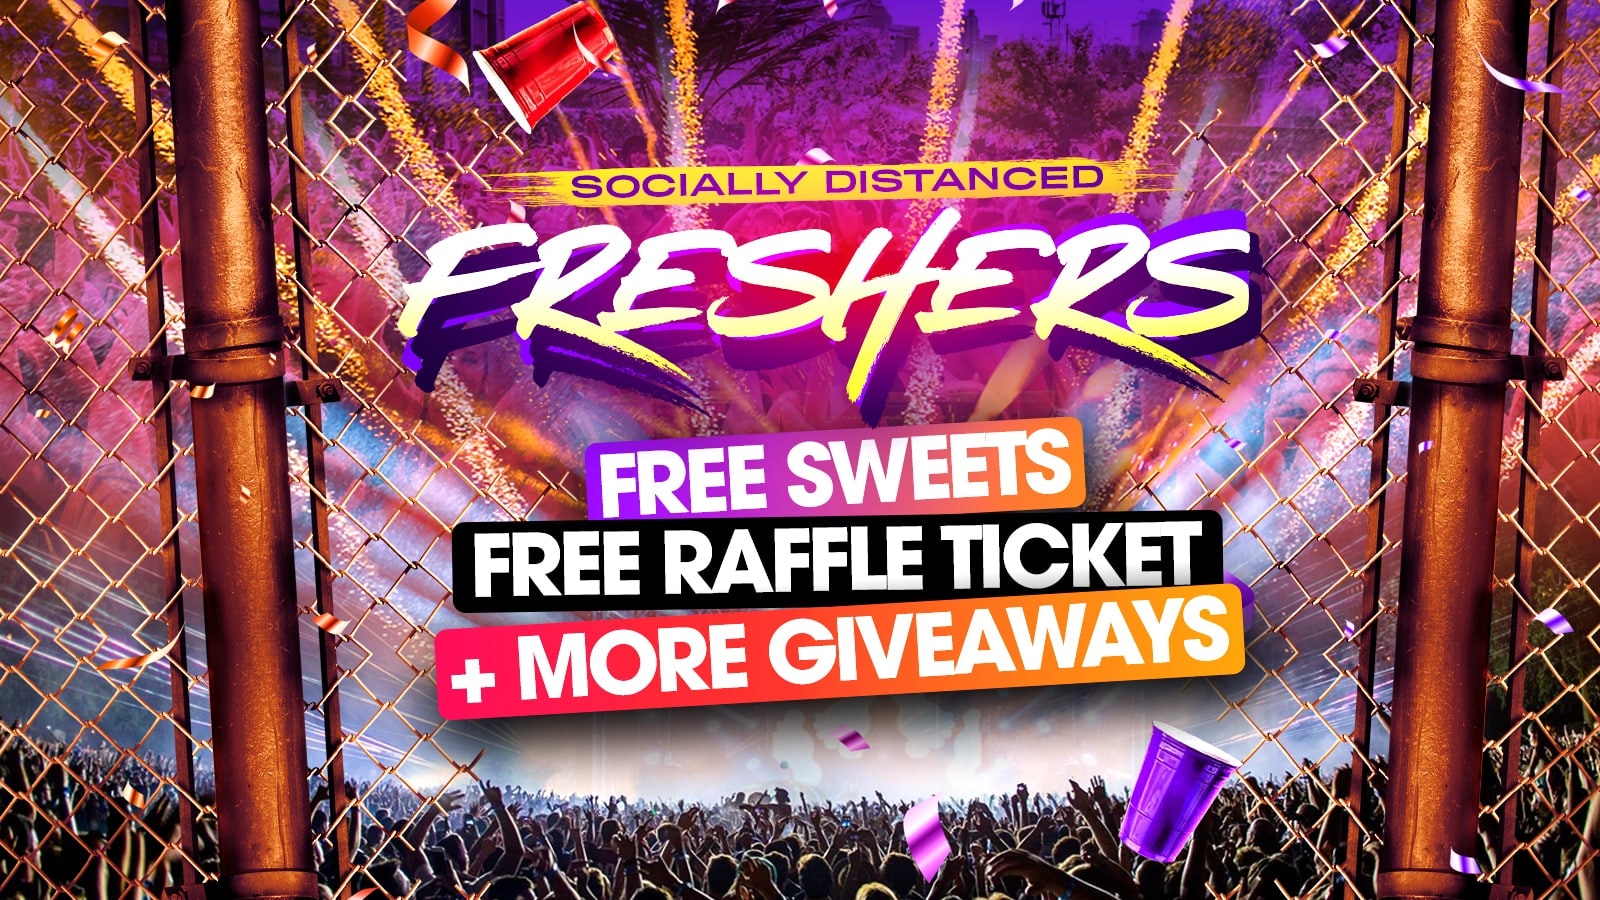 Socially Distanced Freshers – The Socially Distanced Freshers House Party // Southampton Freshers 2020 – Tickets £5 Per Person!!